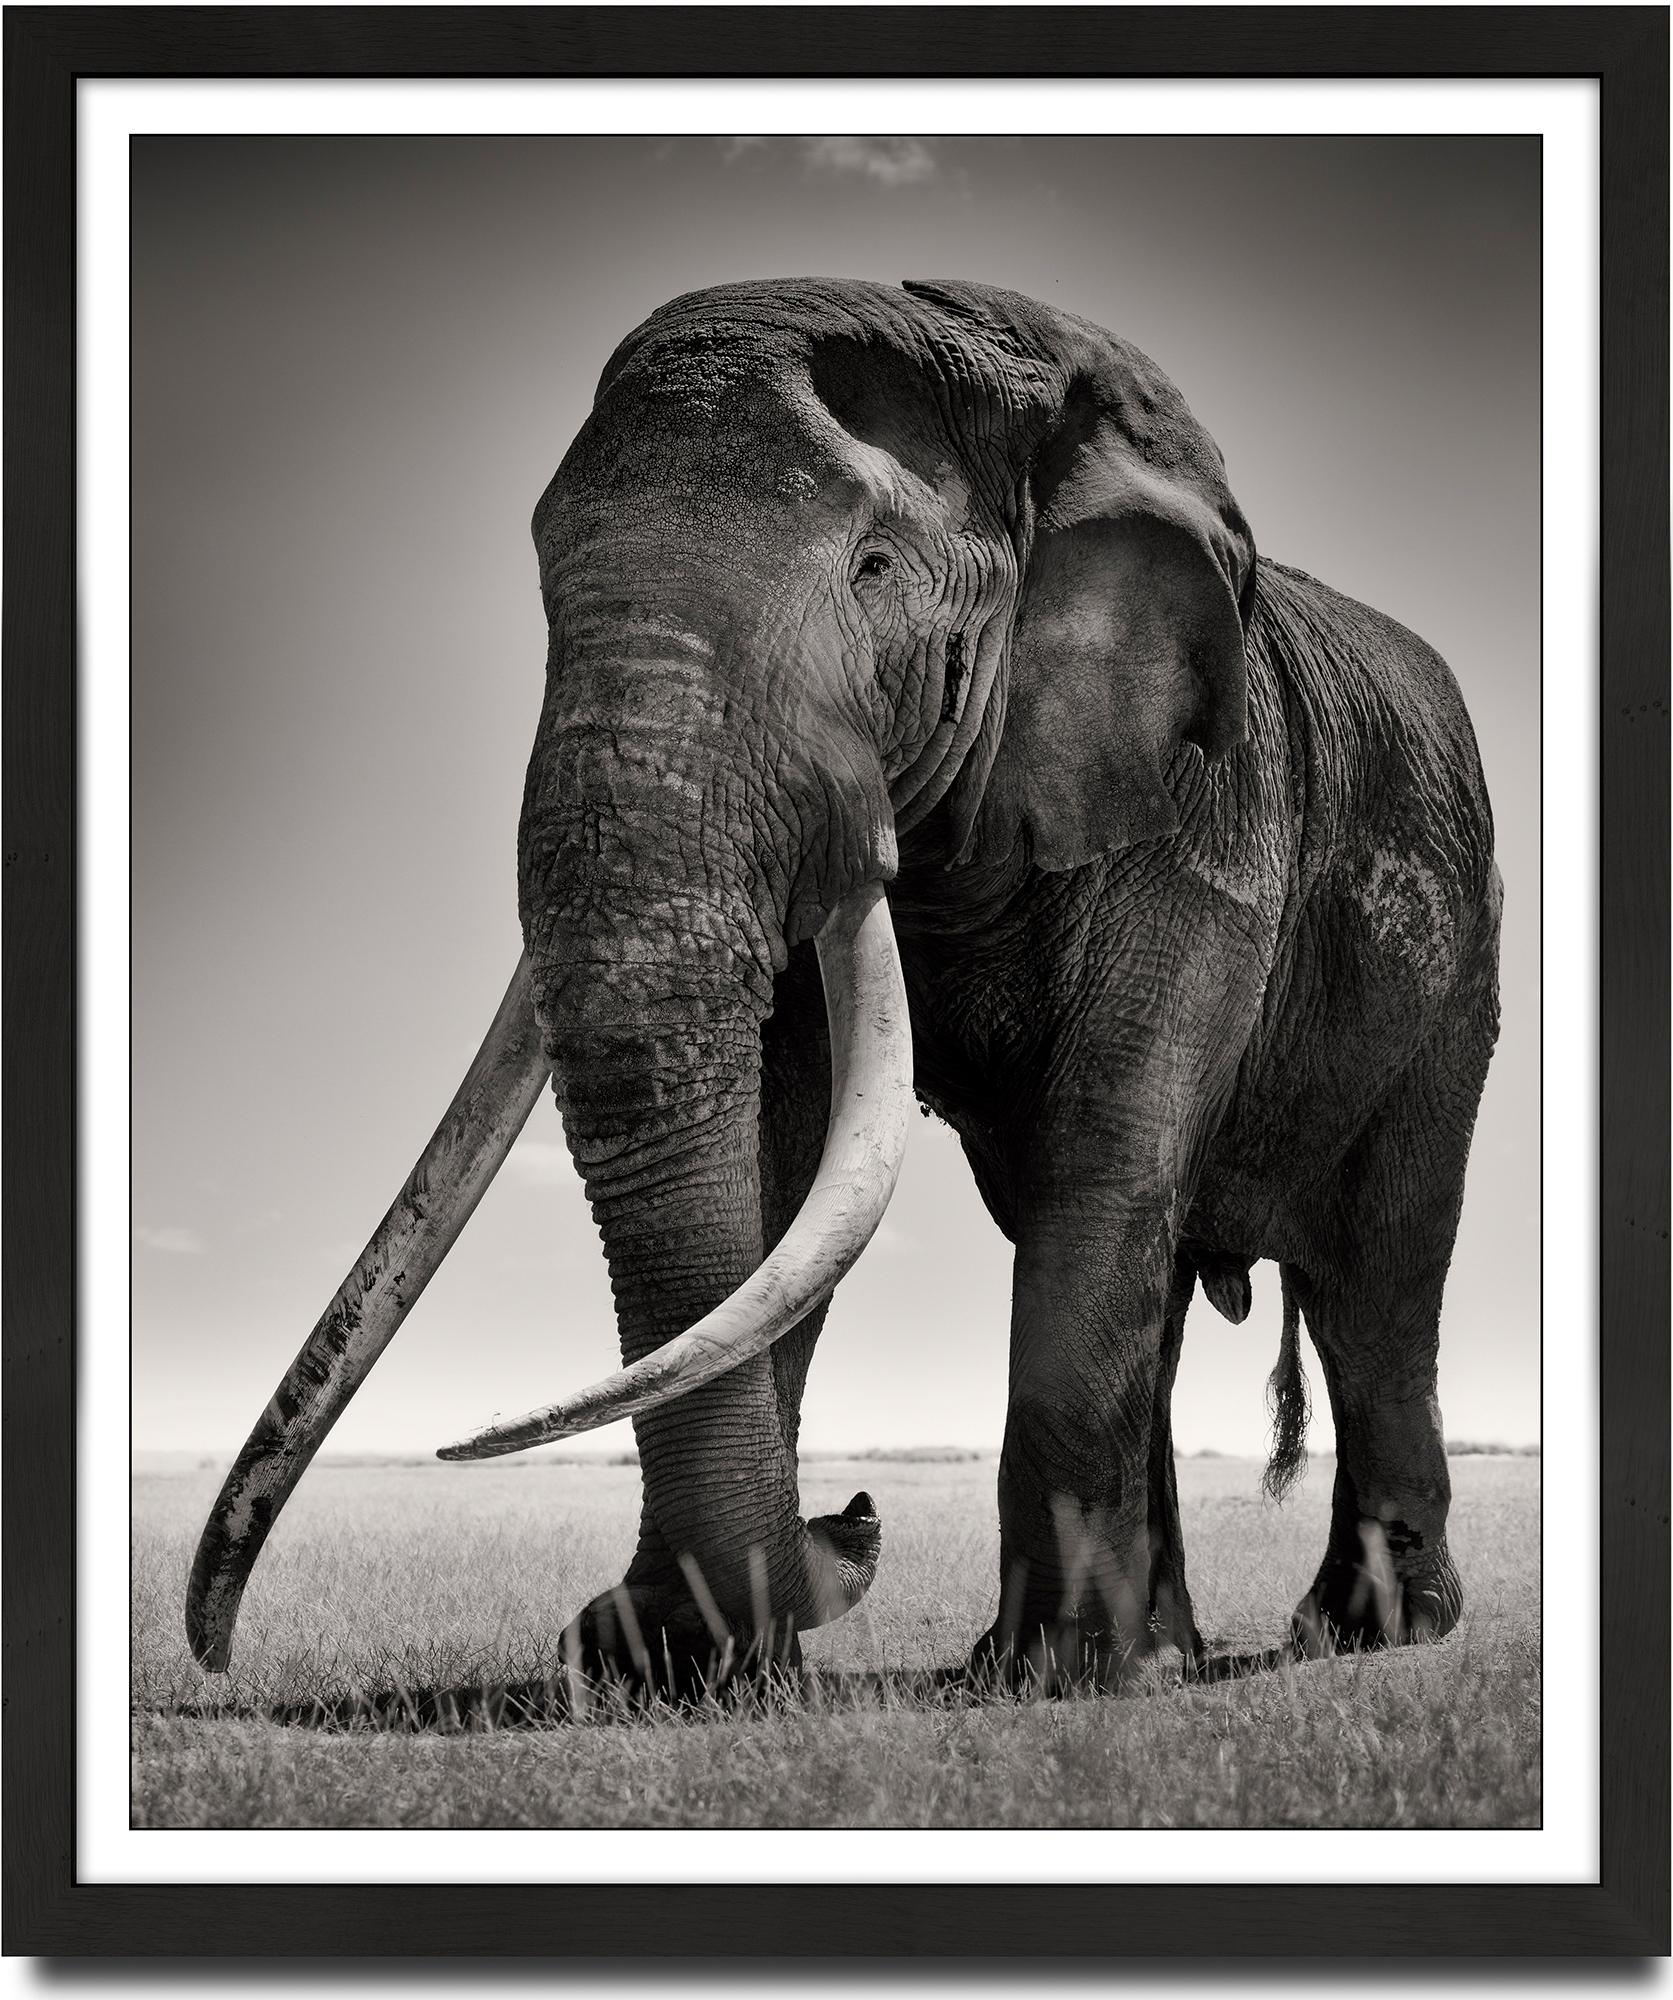 Portrait of Tim, animal, wildlife, black and white photography, elephant - Photograph by Joachim Schmeisser